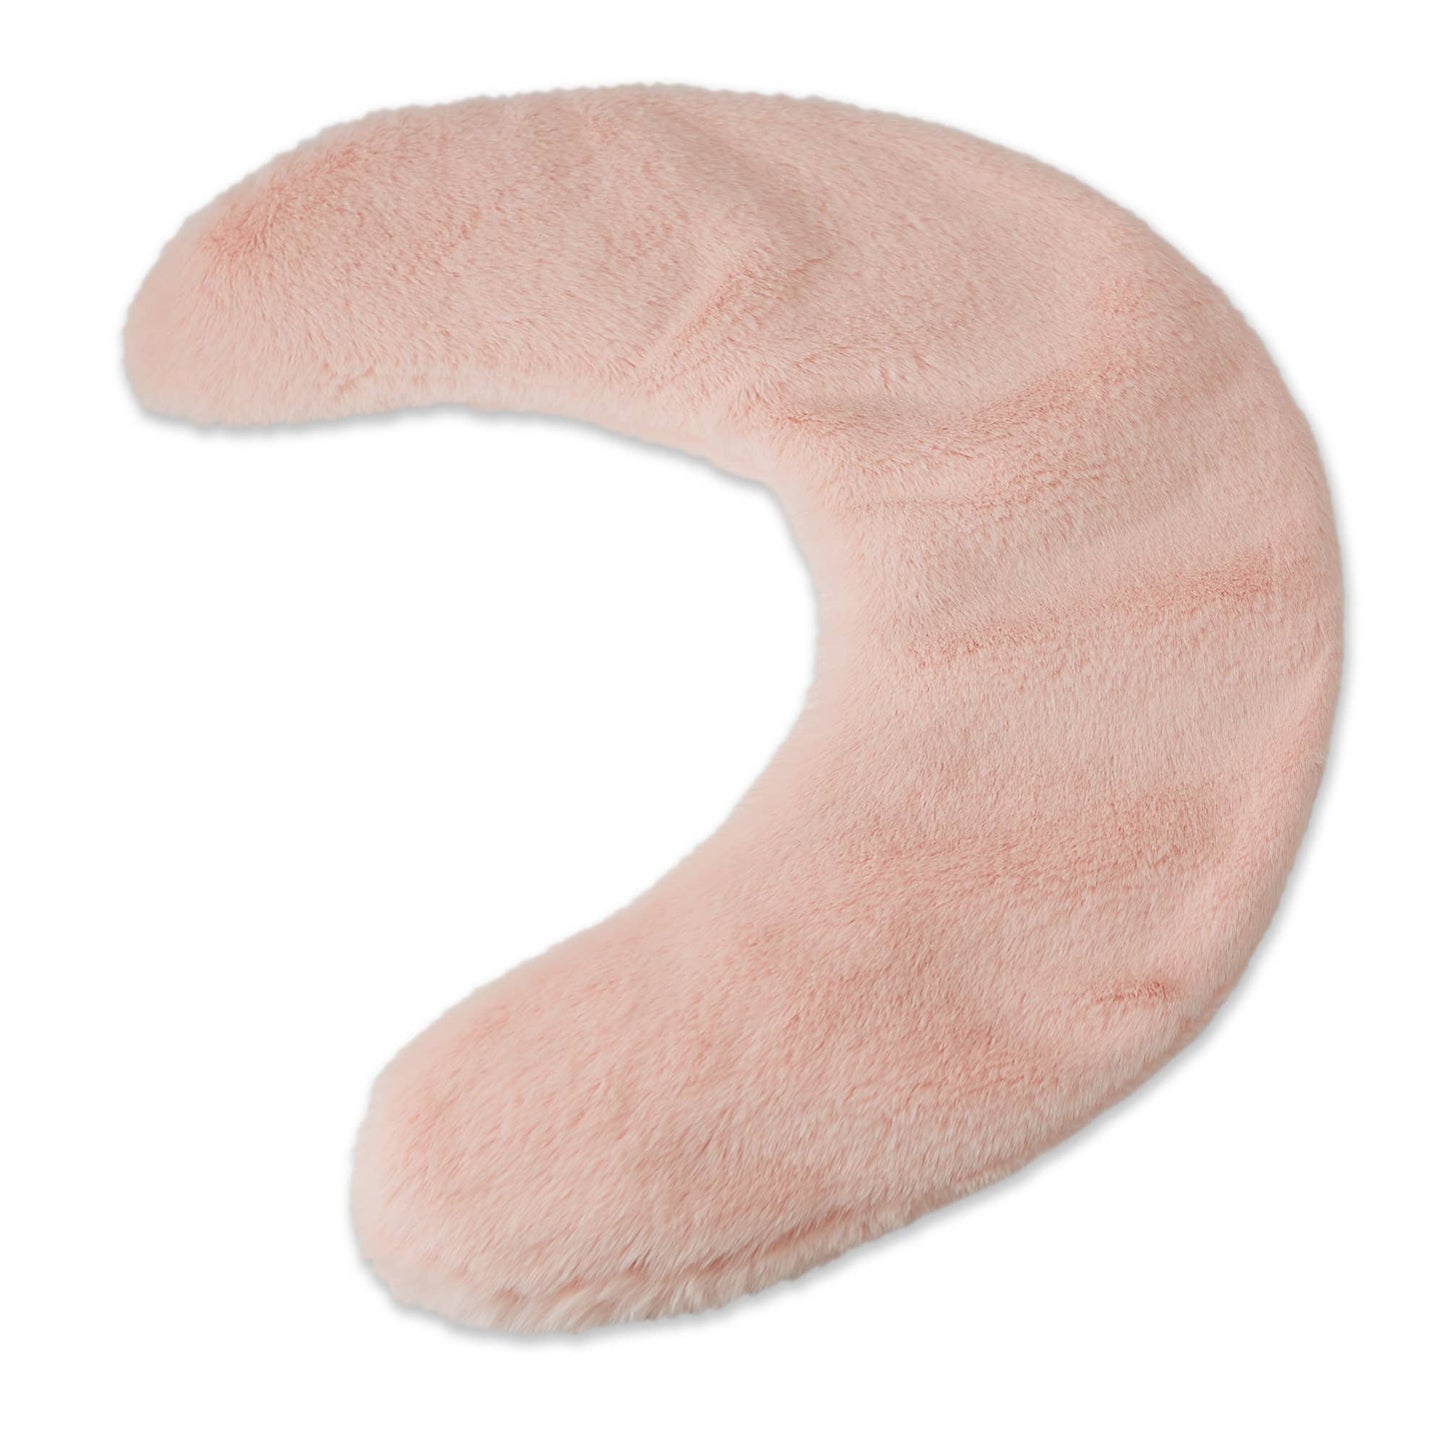 Hot/Cold - Neck Wrap - Ultra Luxe Plush Pink